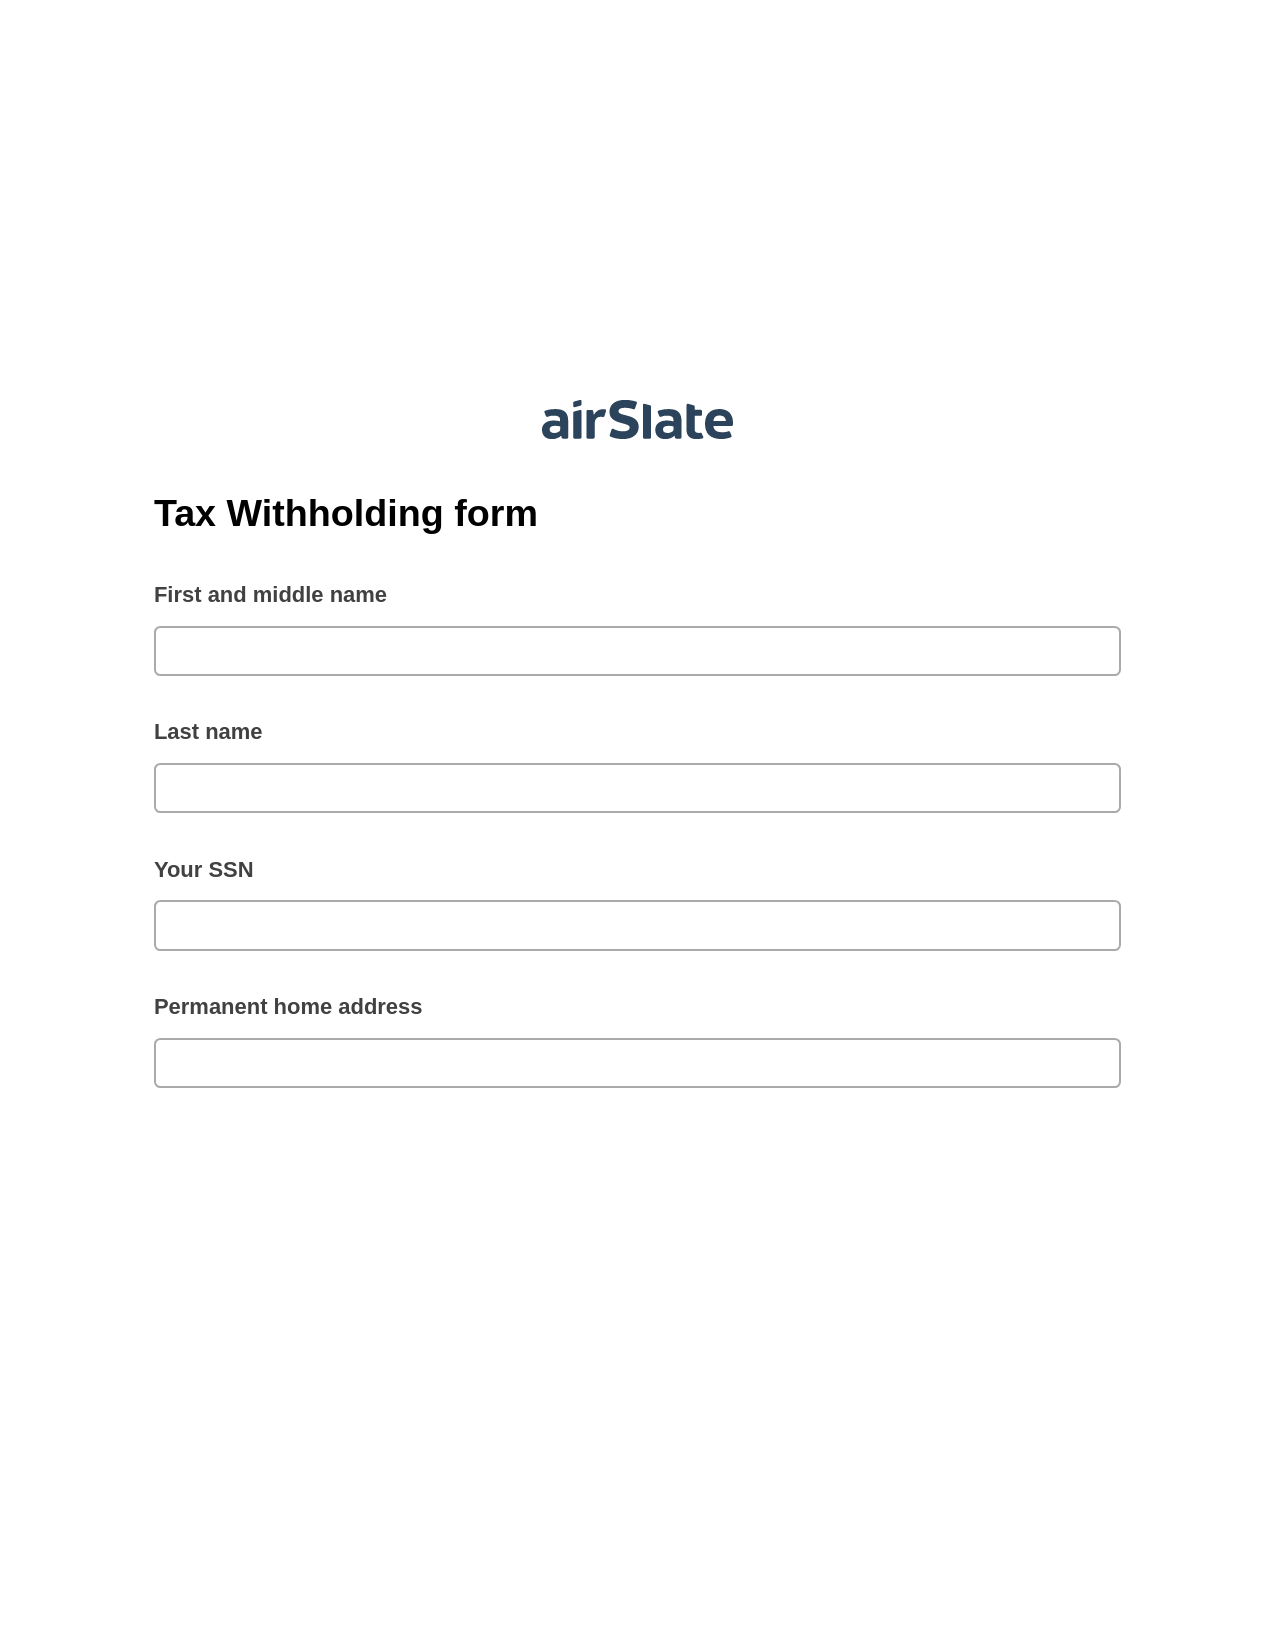 Multirole Tax Withholding form Pre-fill from Salesforce Records Bot, Create slate addon, Export to Excel 365 Bot